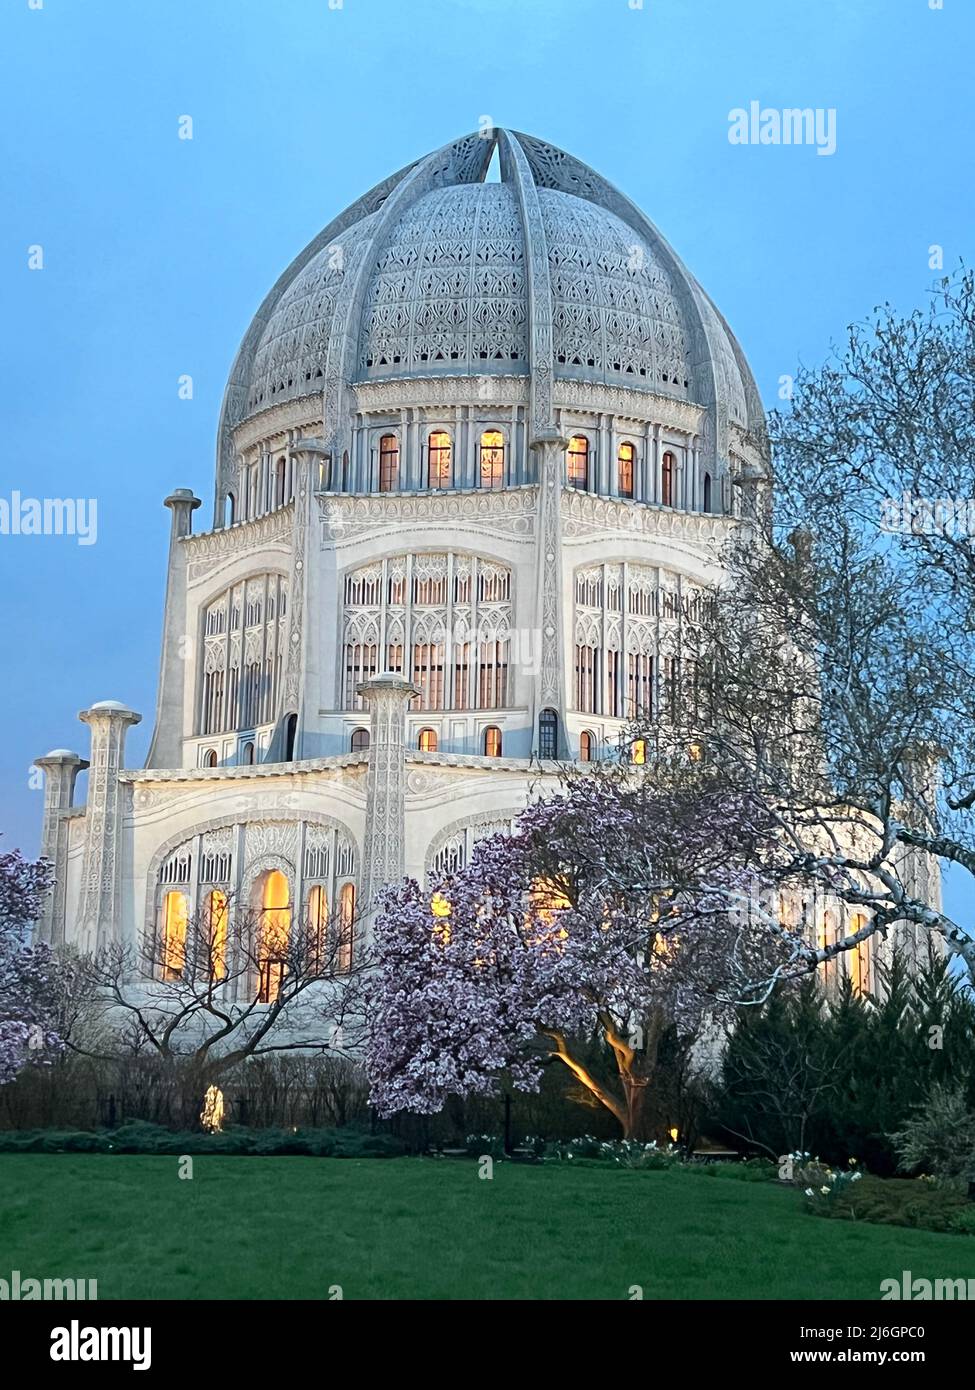 Baha'i House of Worship on an early spring evening with flowering trees in bloom. The temple is located in Wilmette, Illinois. Stock Photo